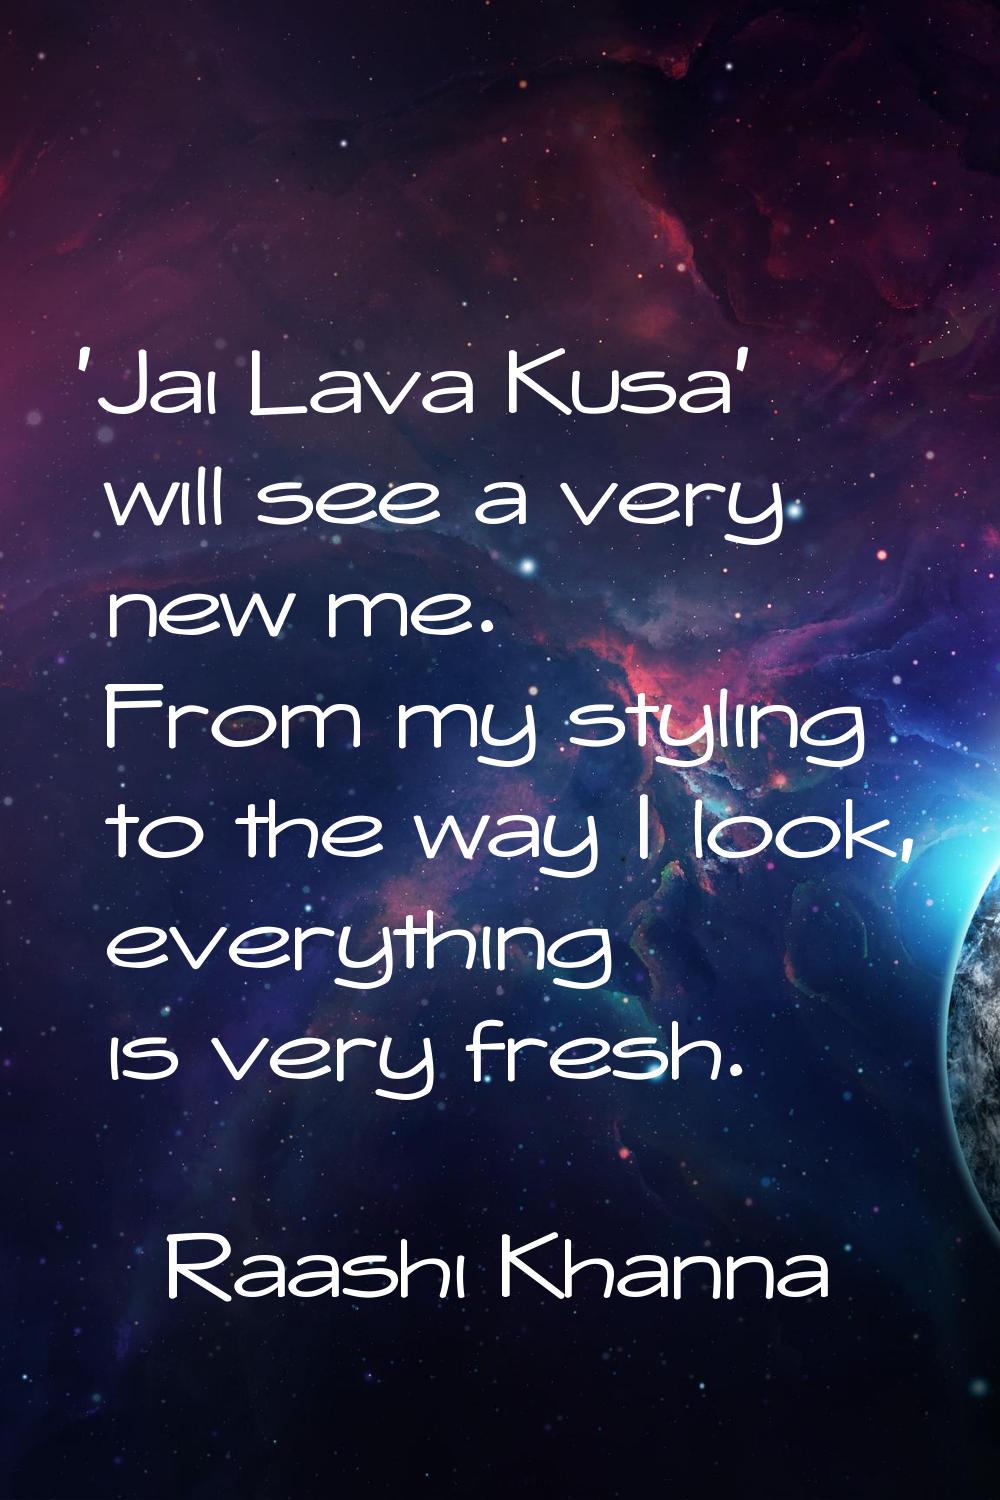 'Jai Lava Kusa' will see a very new me. From my styling to the way I look, everything is very fresh